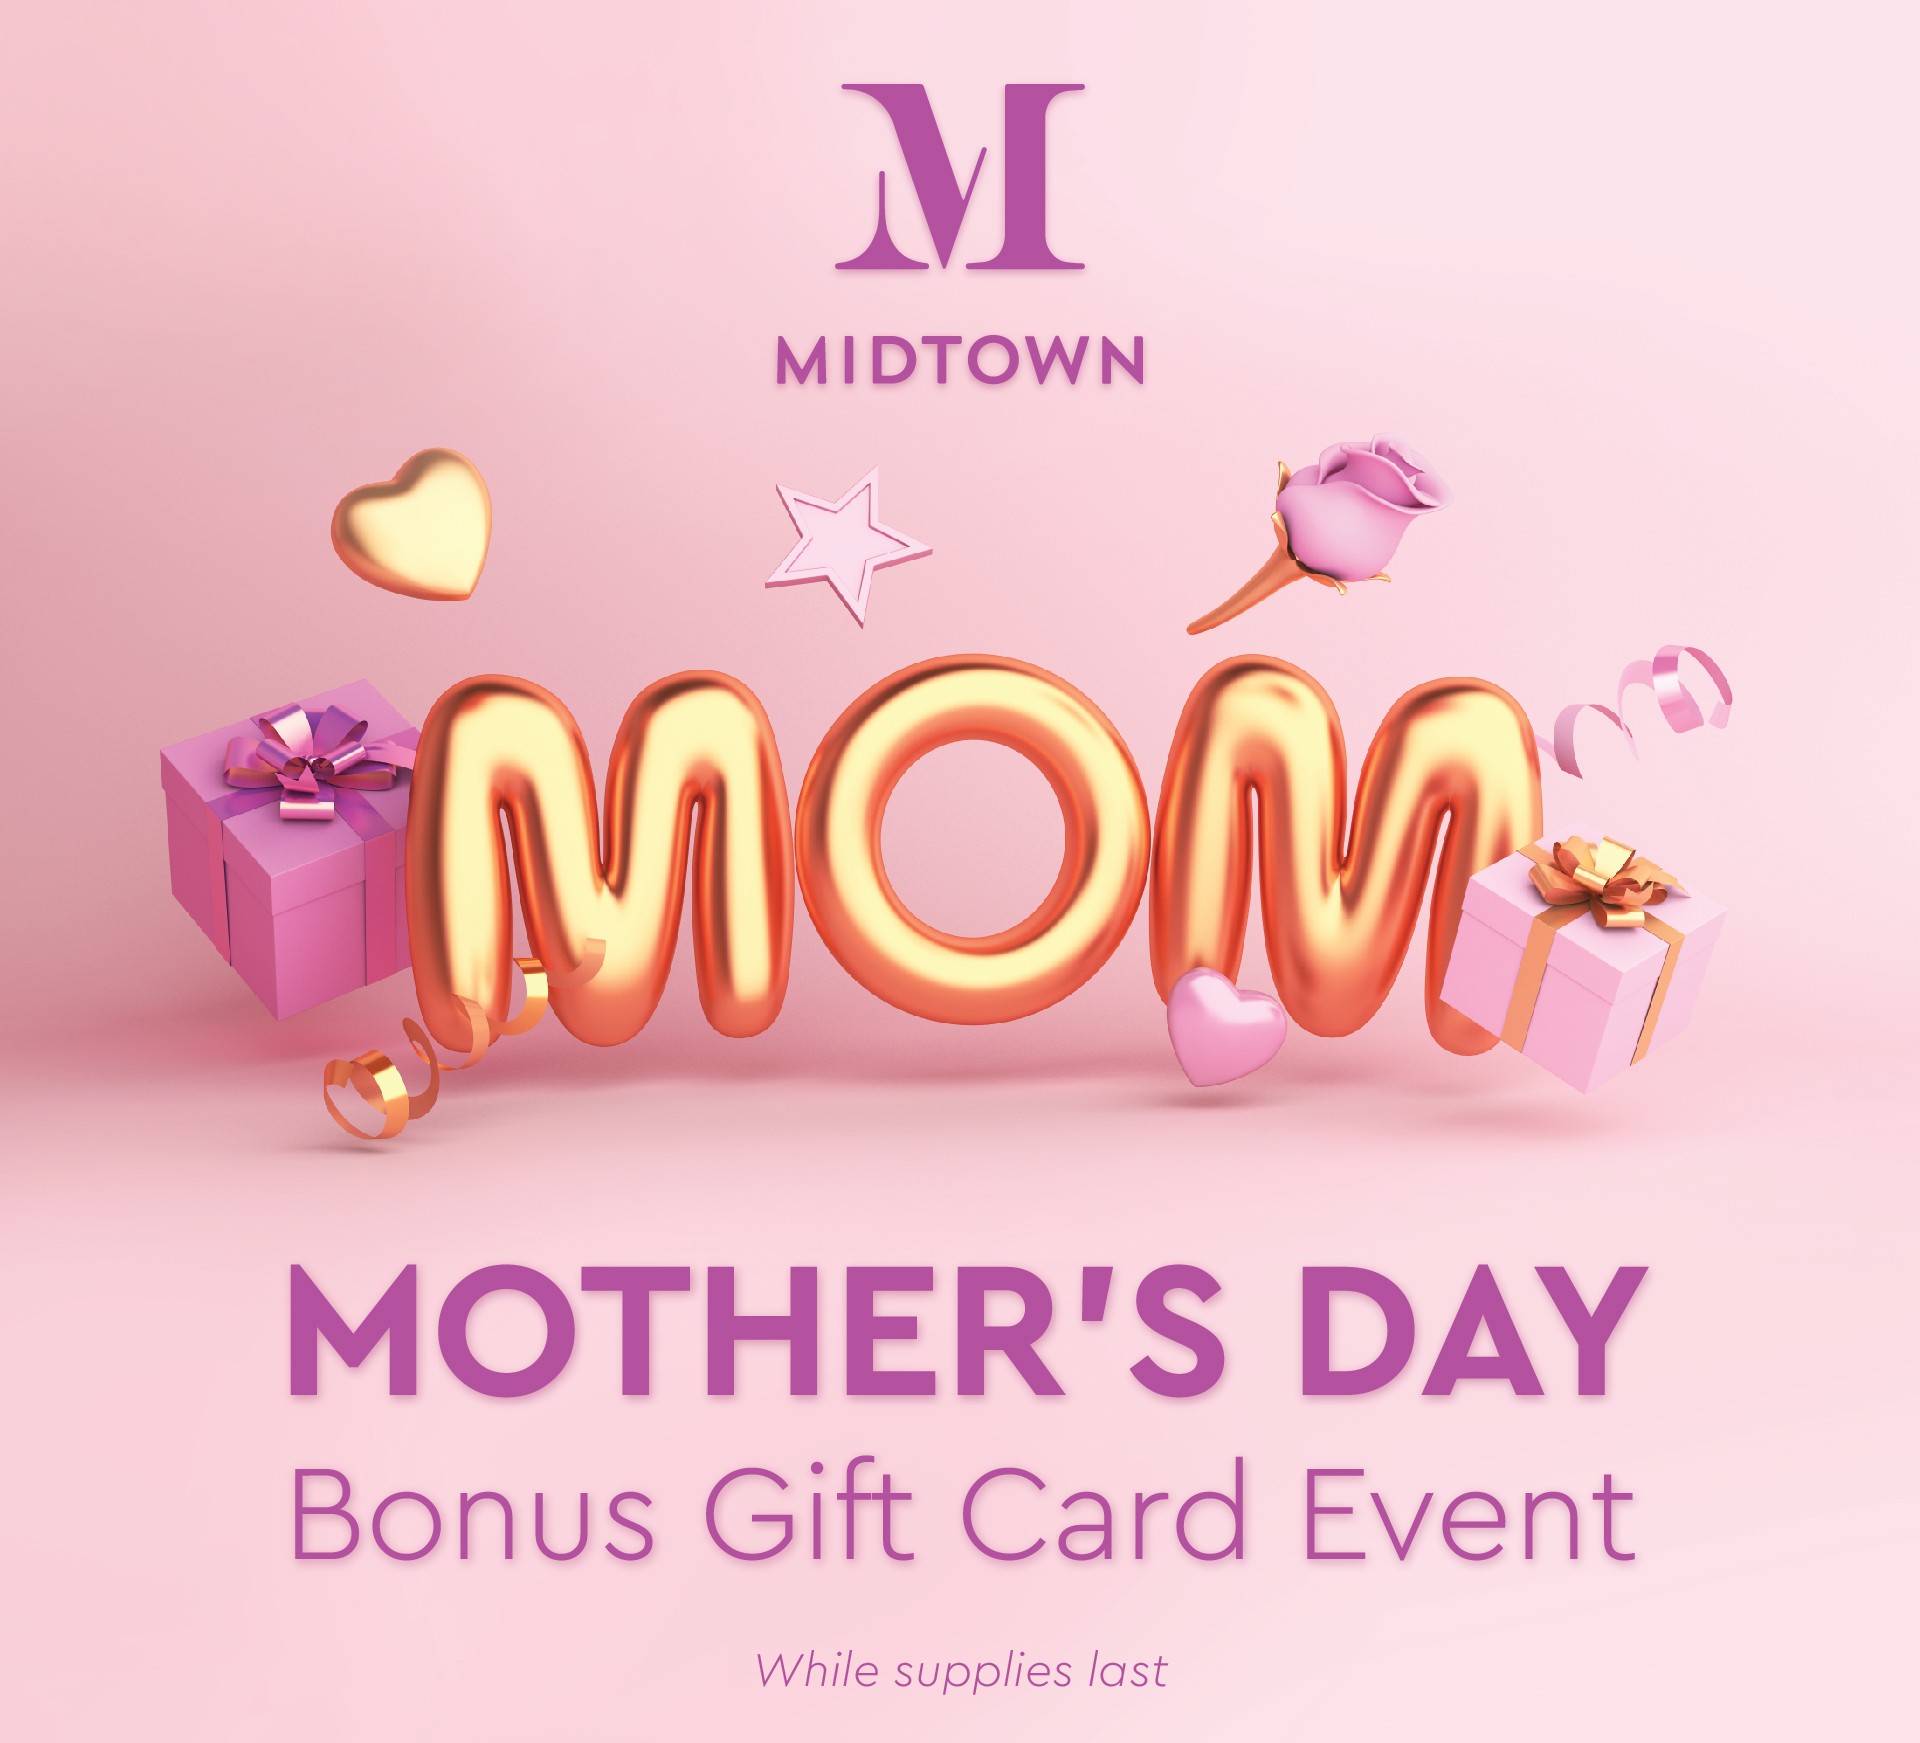 Mother's Day with Midtown